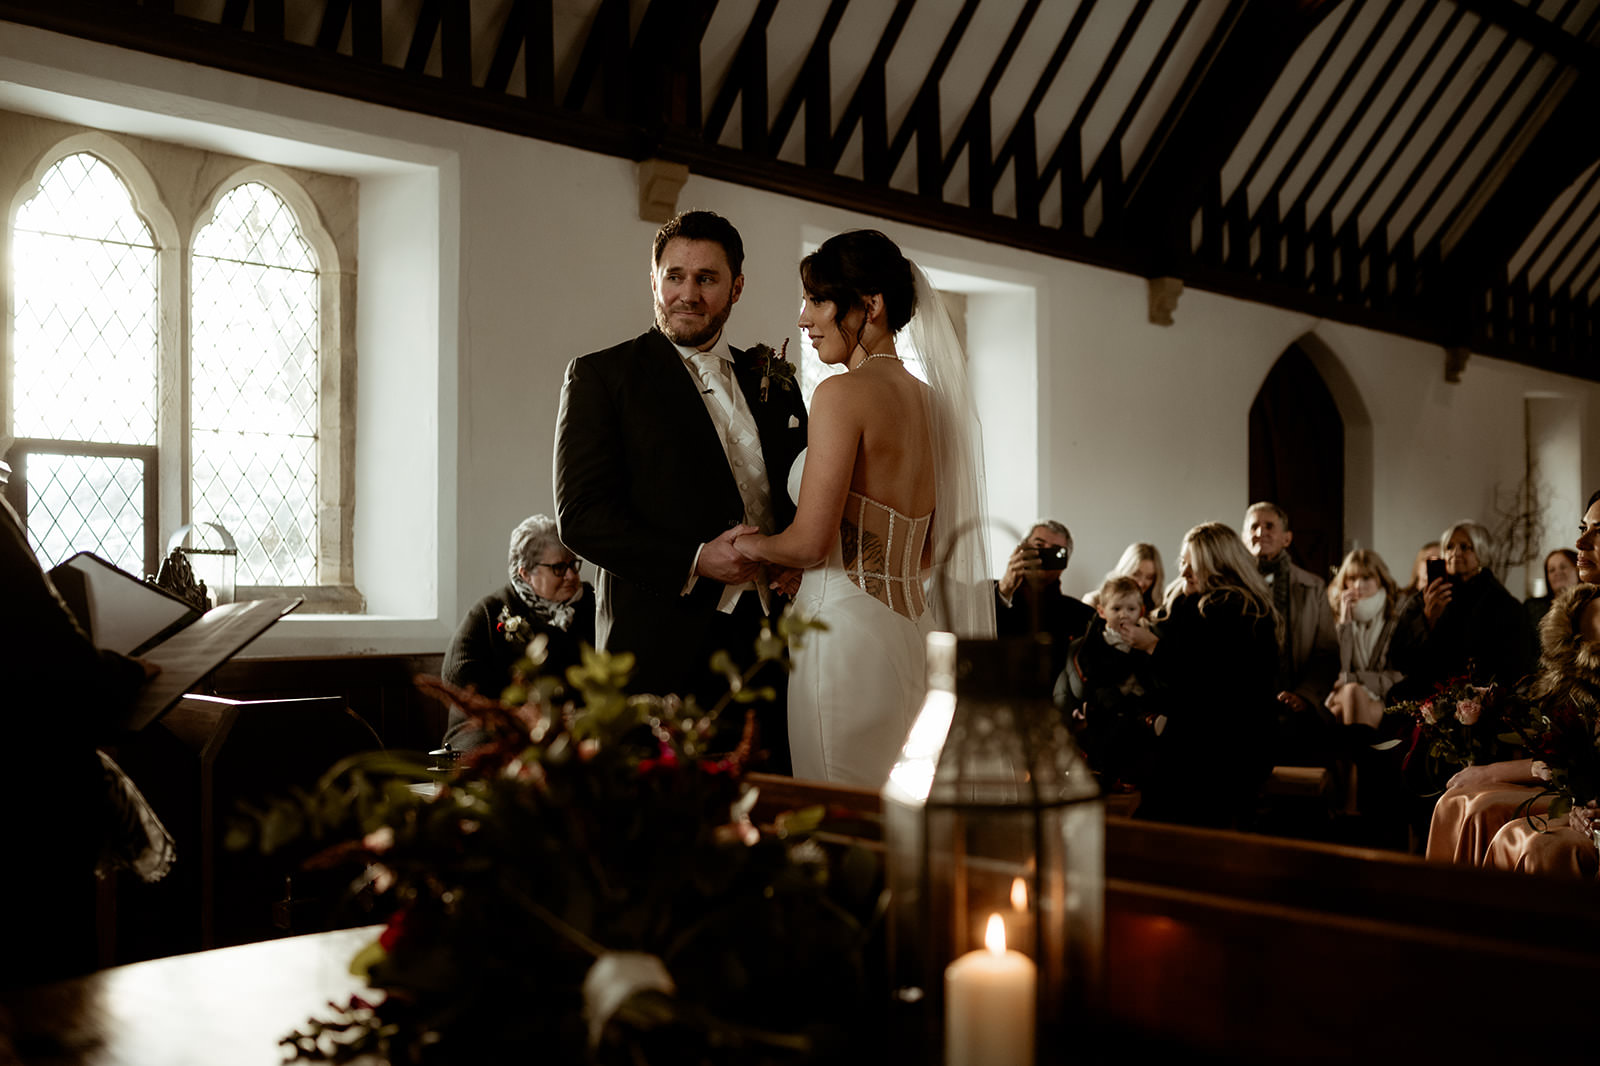 Wales Wedding Photographer | Magical Winter Elopement Wedding at The Gwenfrewi Project